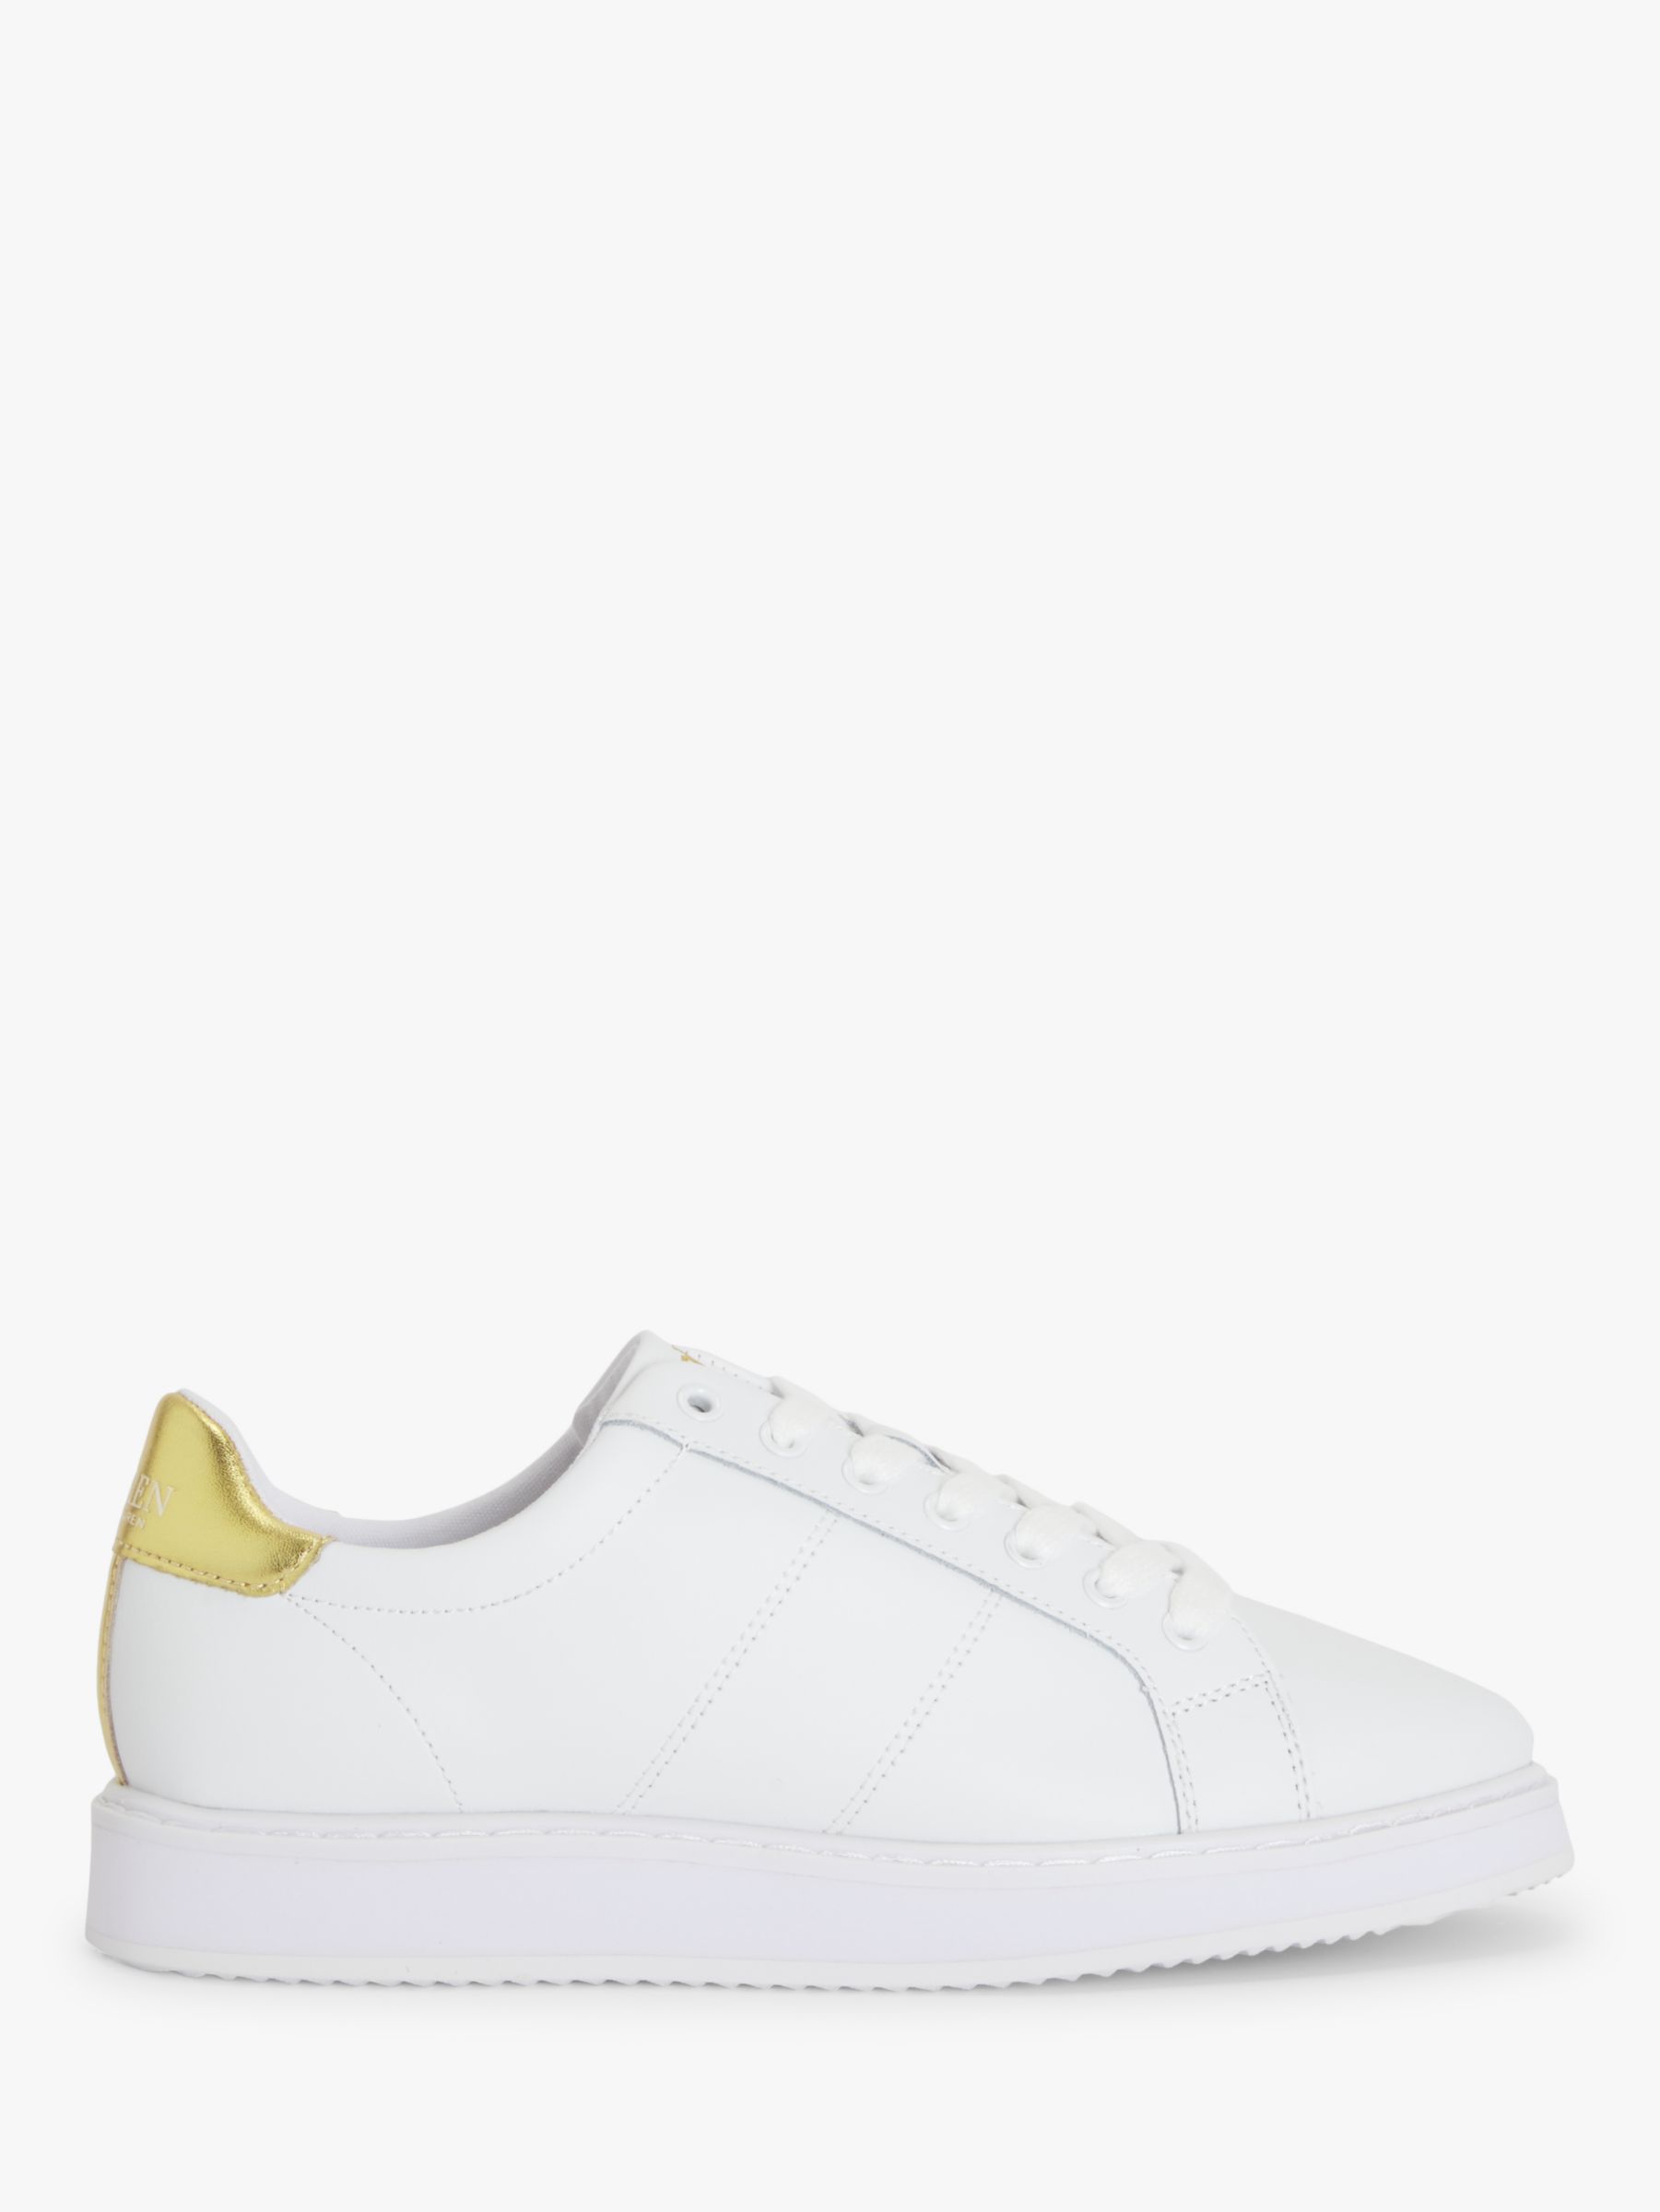 Ralph Lauren Angeline Leather Trainers, White at John Lewis & Partners